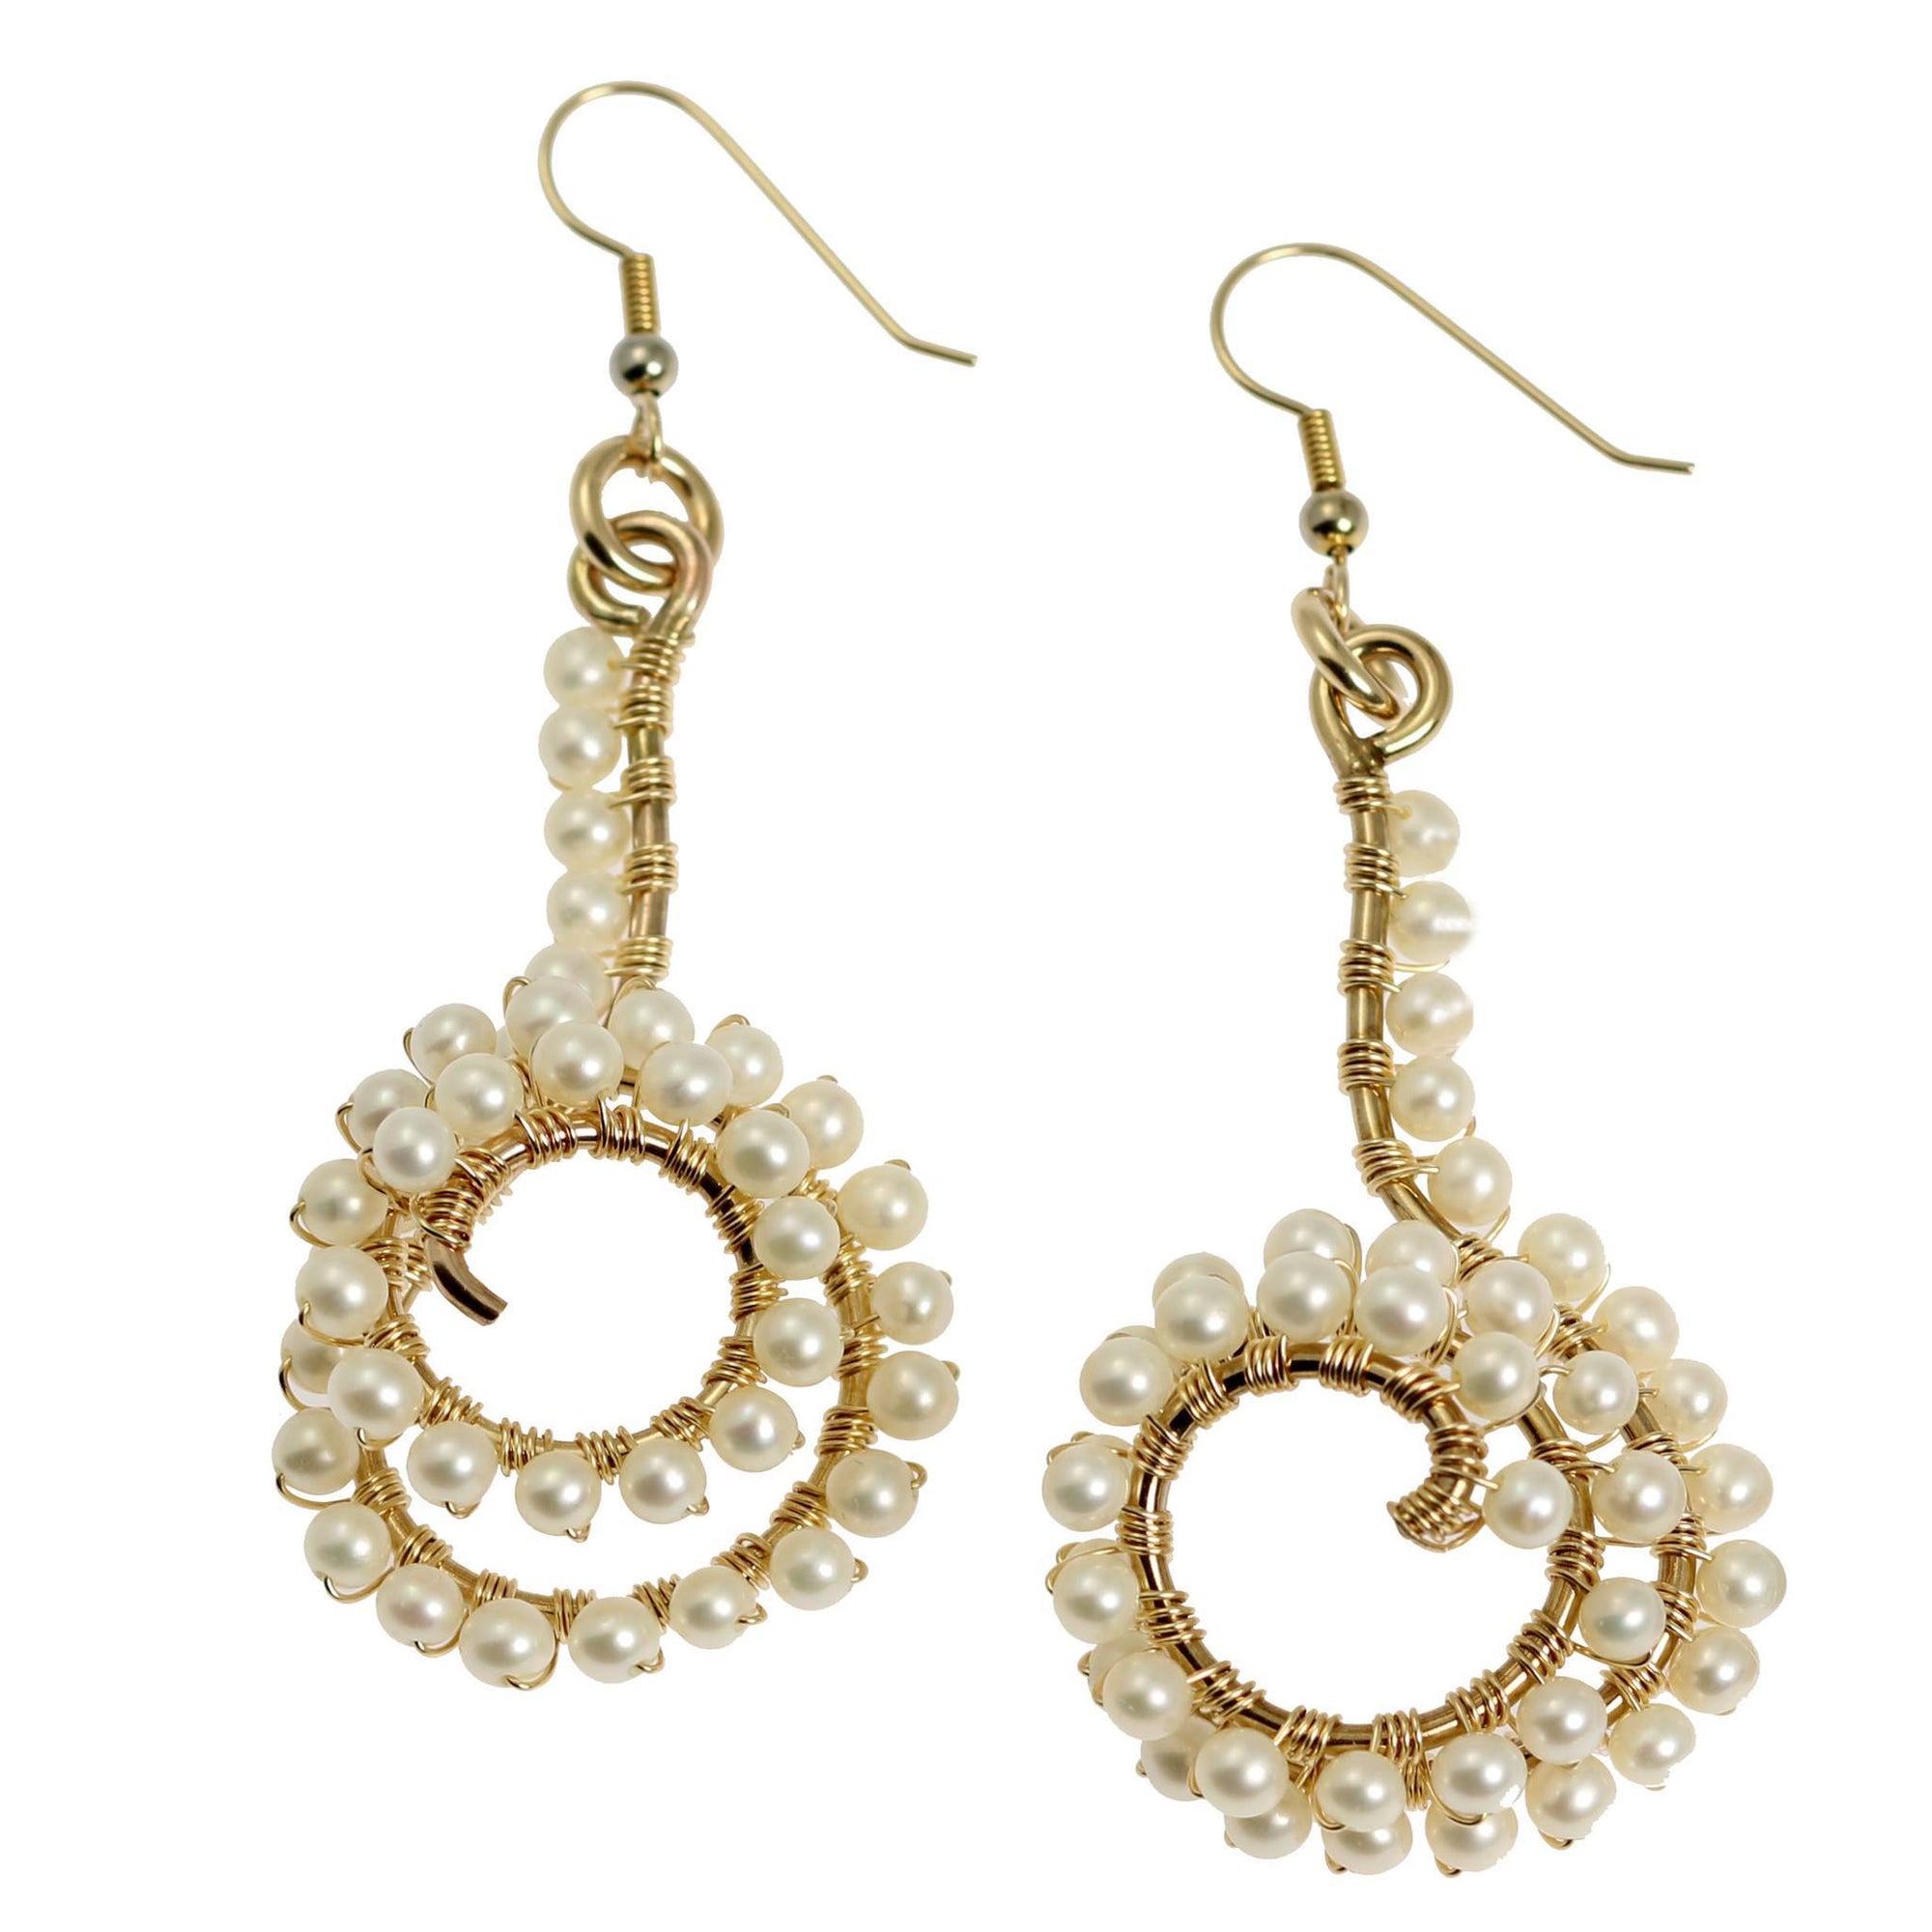 14K Gold-filled Wire Wrapped Spiral Earrings With Pearls